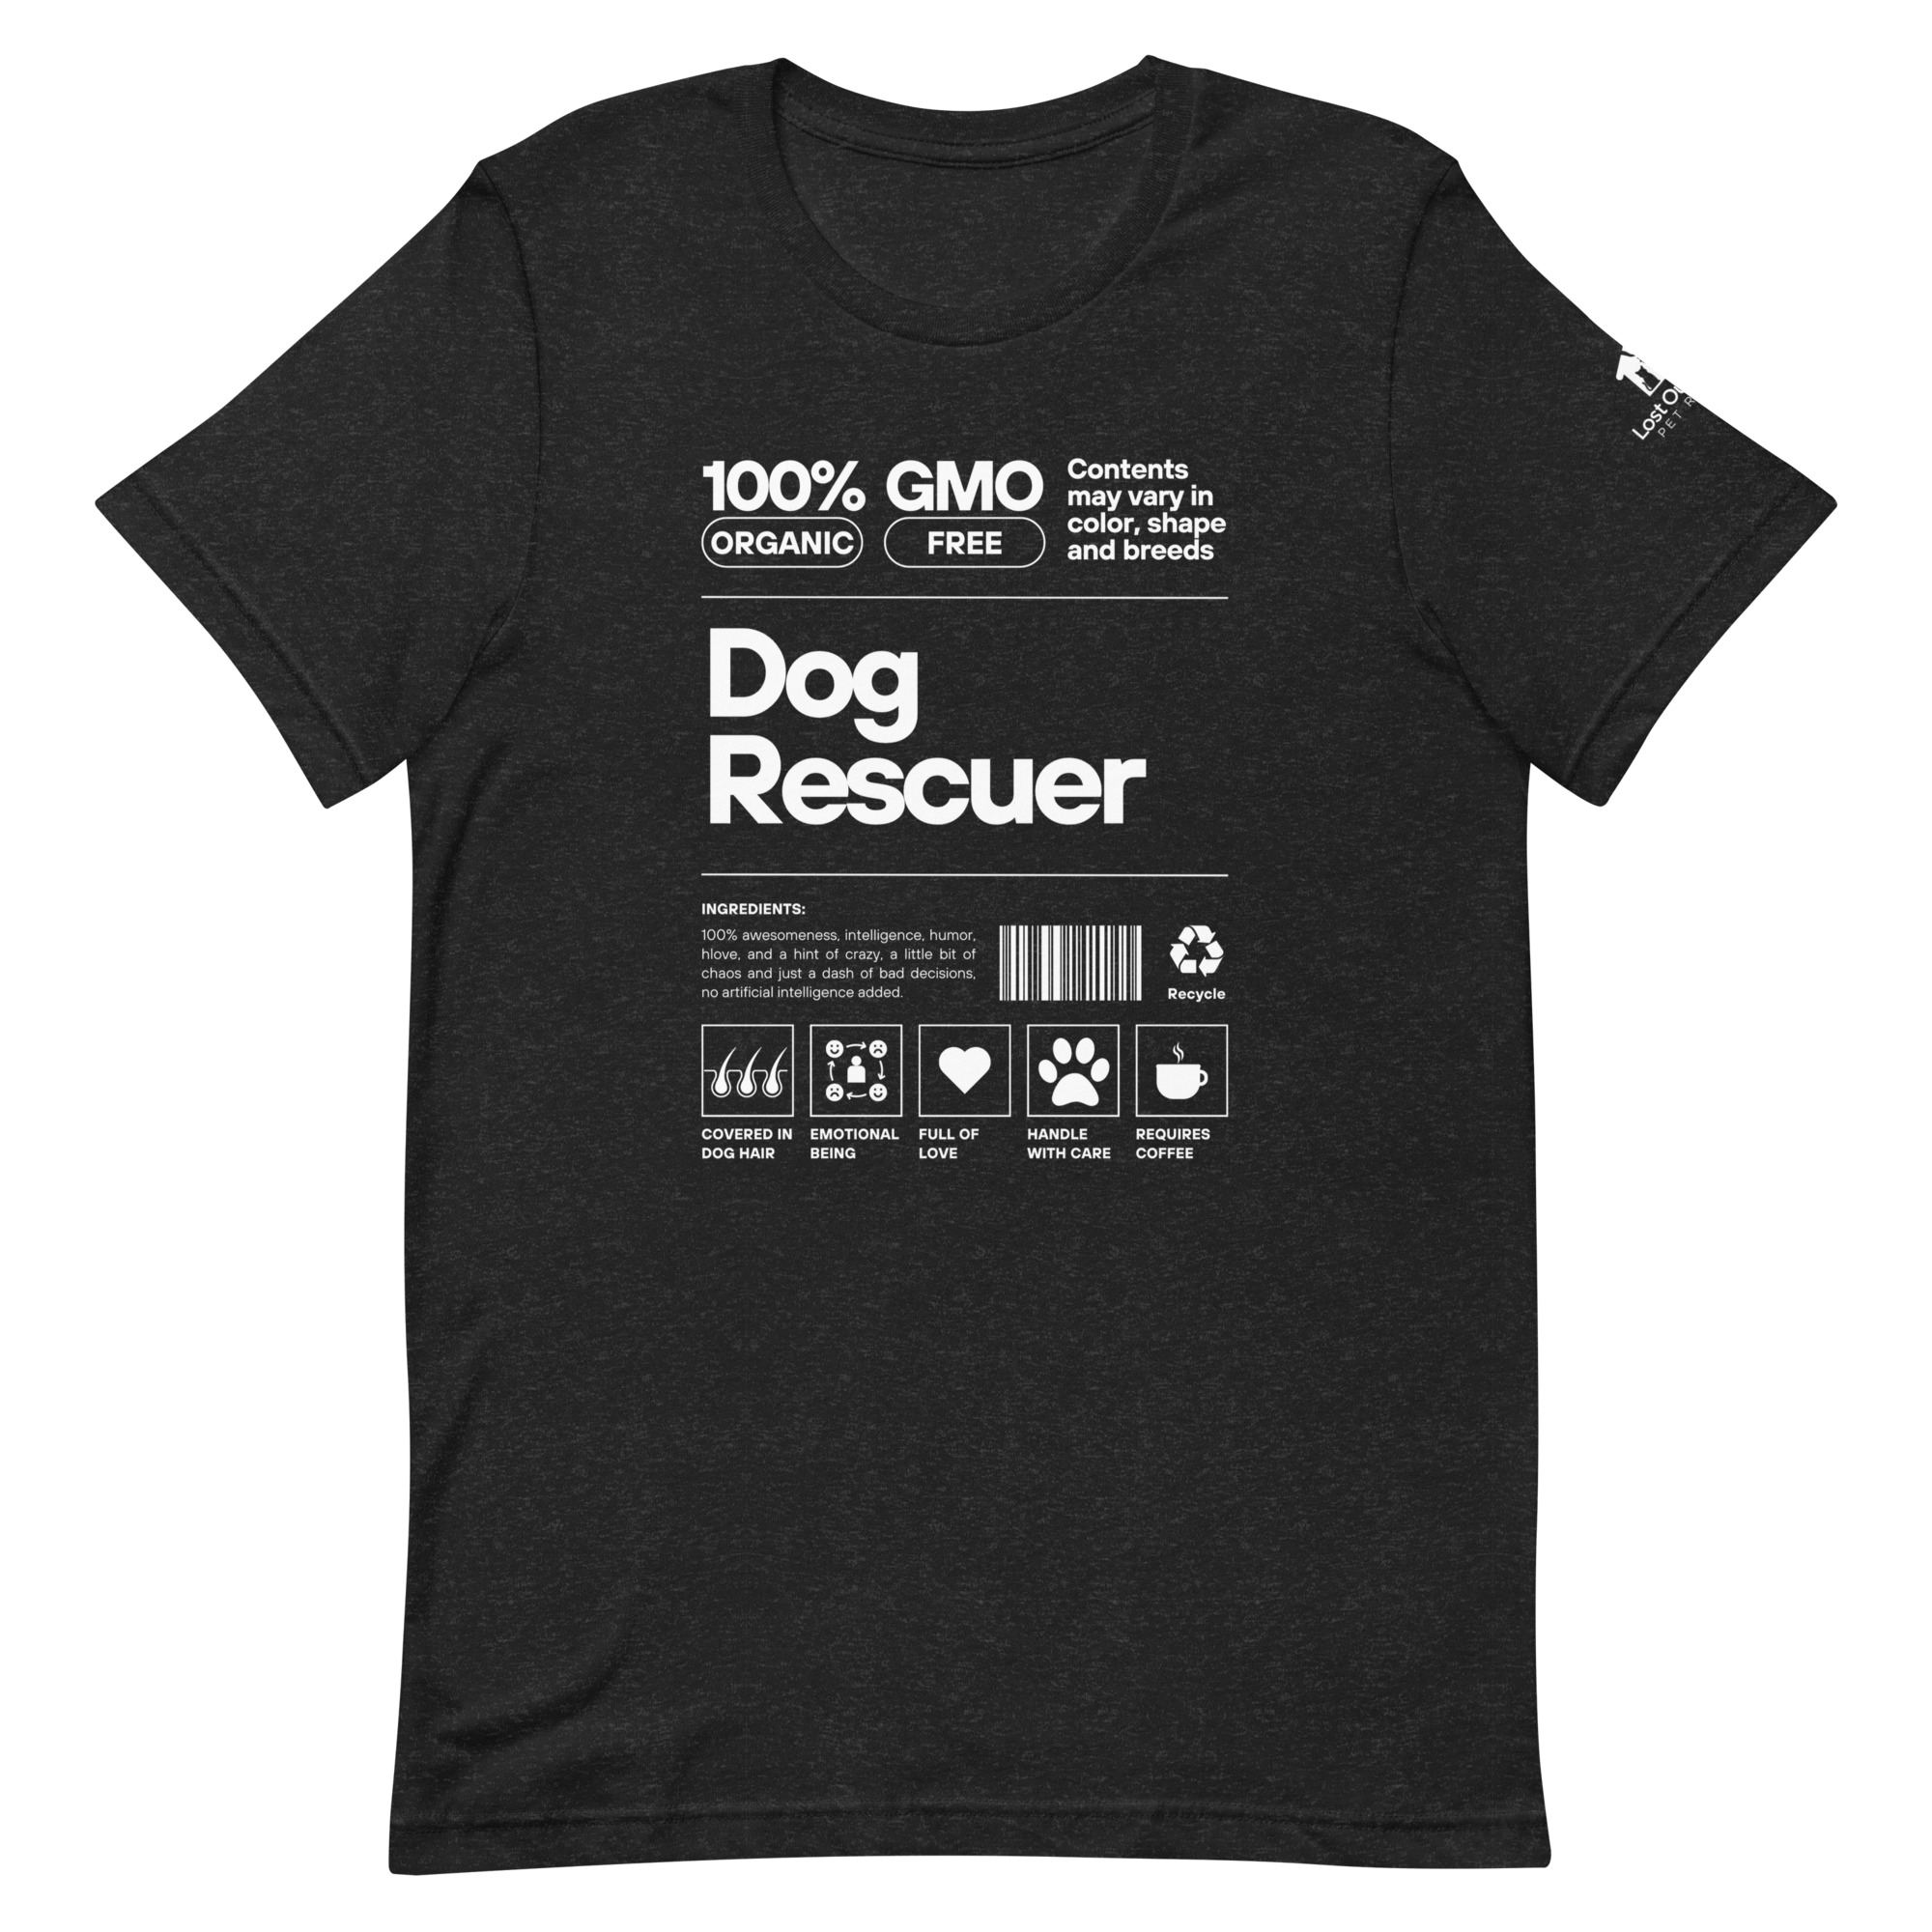 Dog Rescuer T-Shirt - Lost Our Home